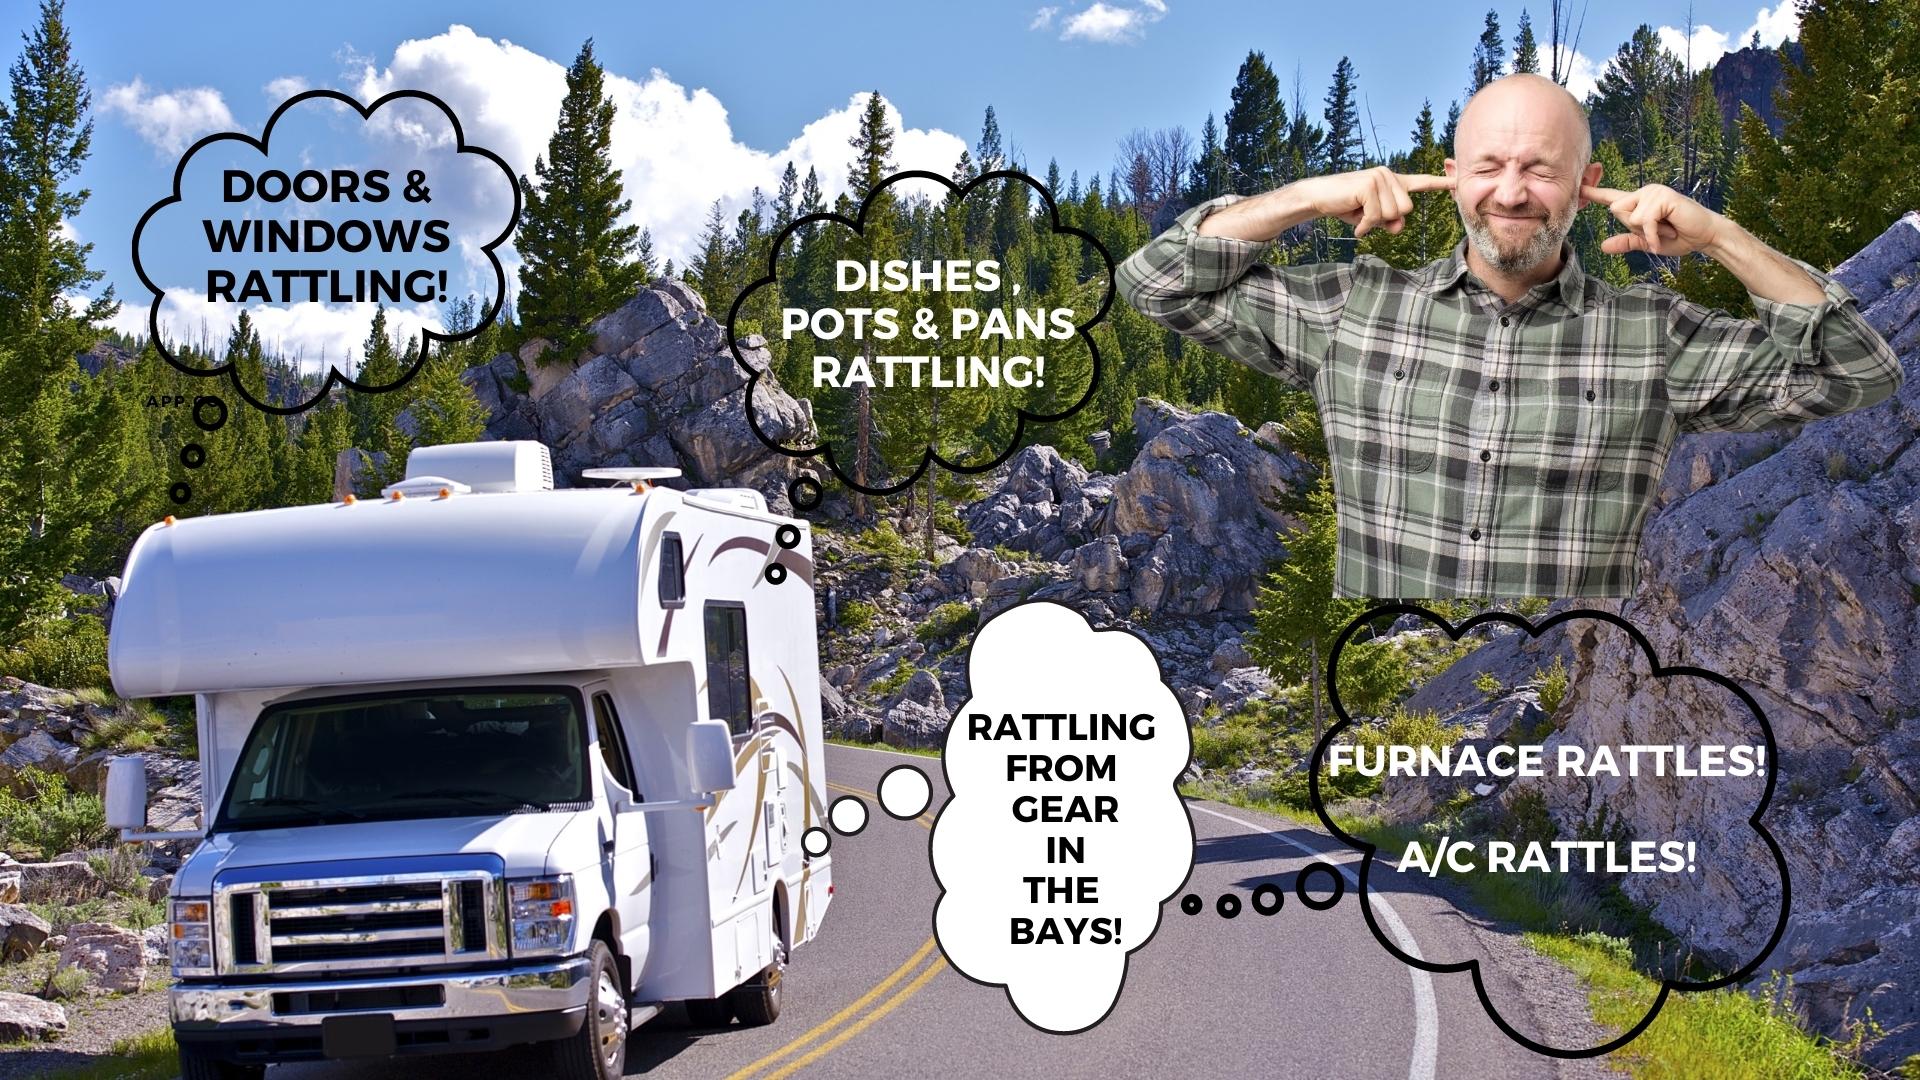 RV Rattles: How to Quiet Dishes, Windows, Doors & More